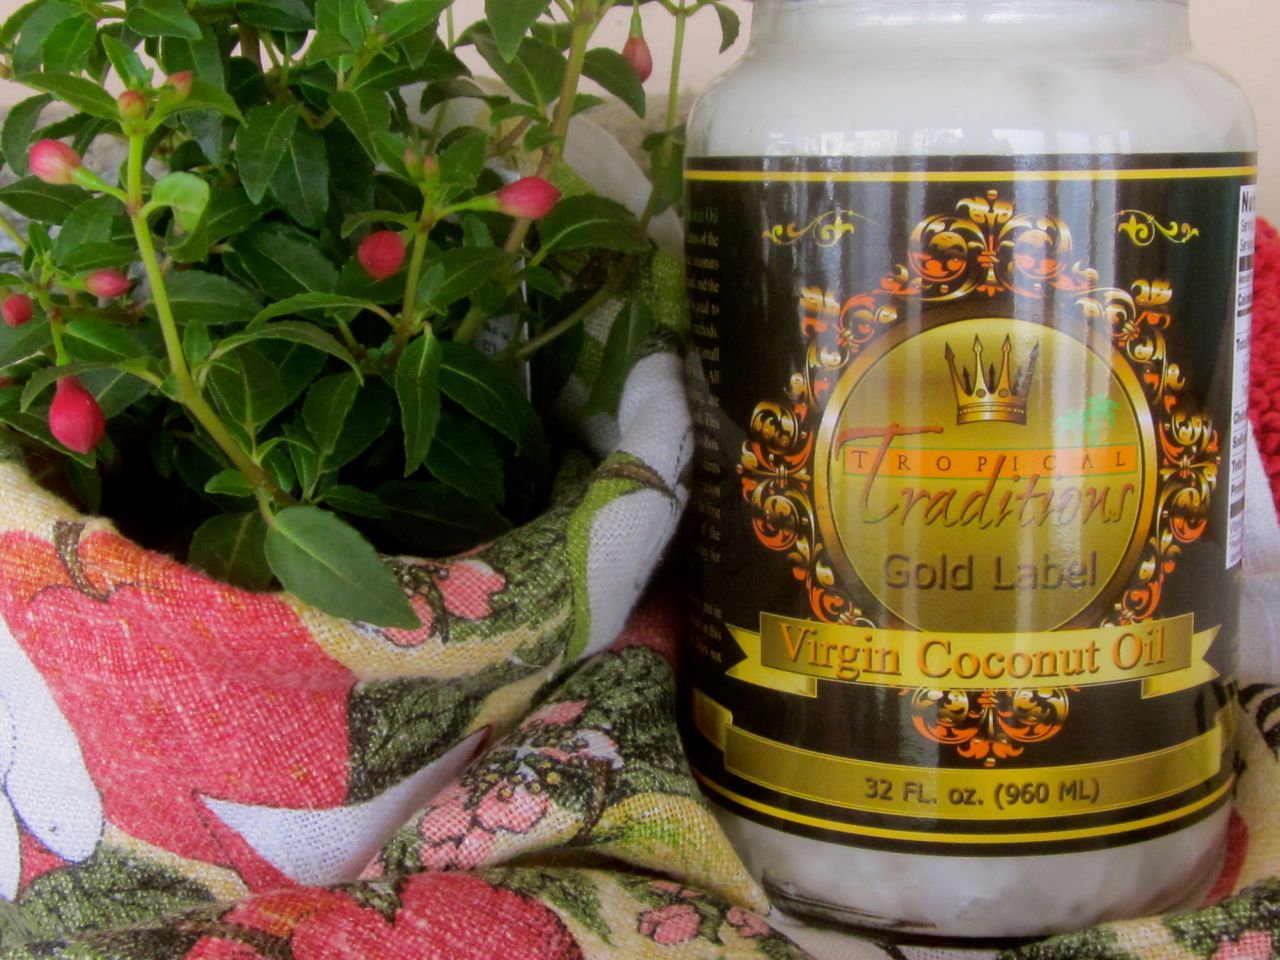 Tropical Traditions Virgin Coconut Oil–the Good Stuff!–GIVEAWAY!